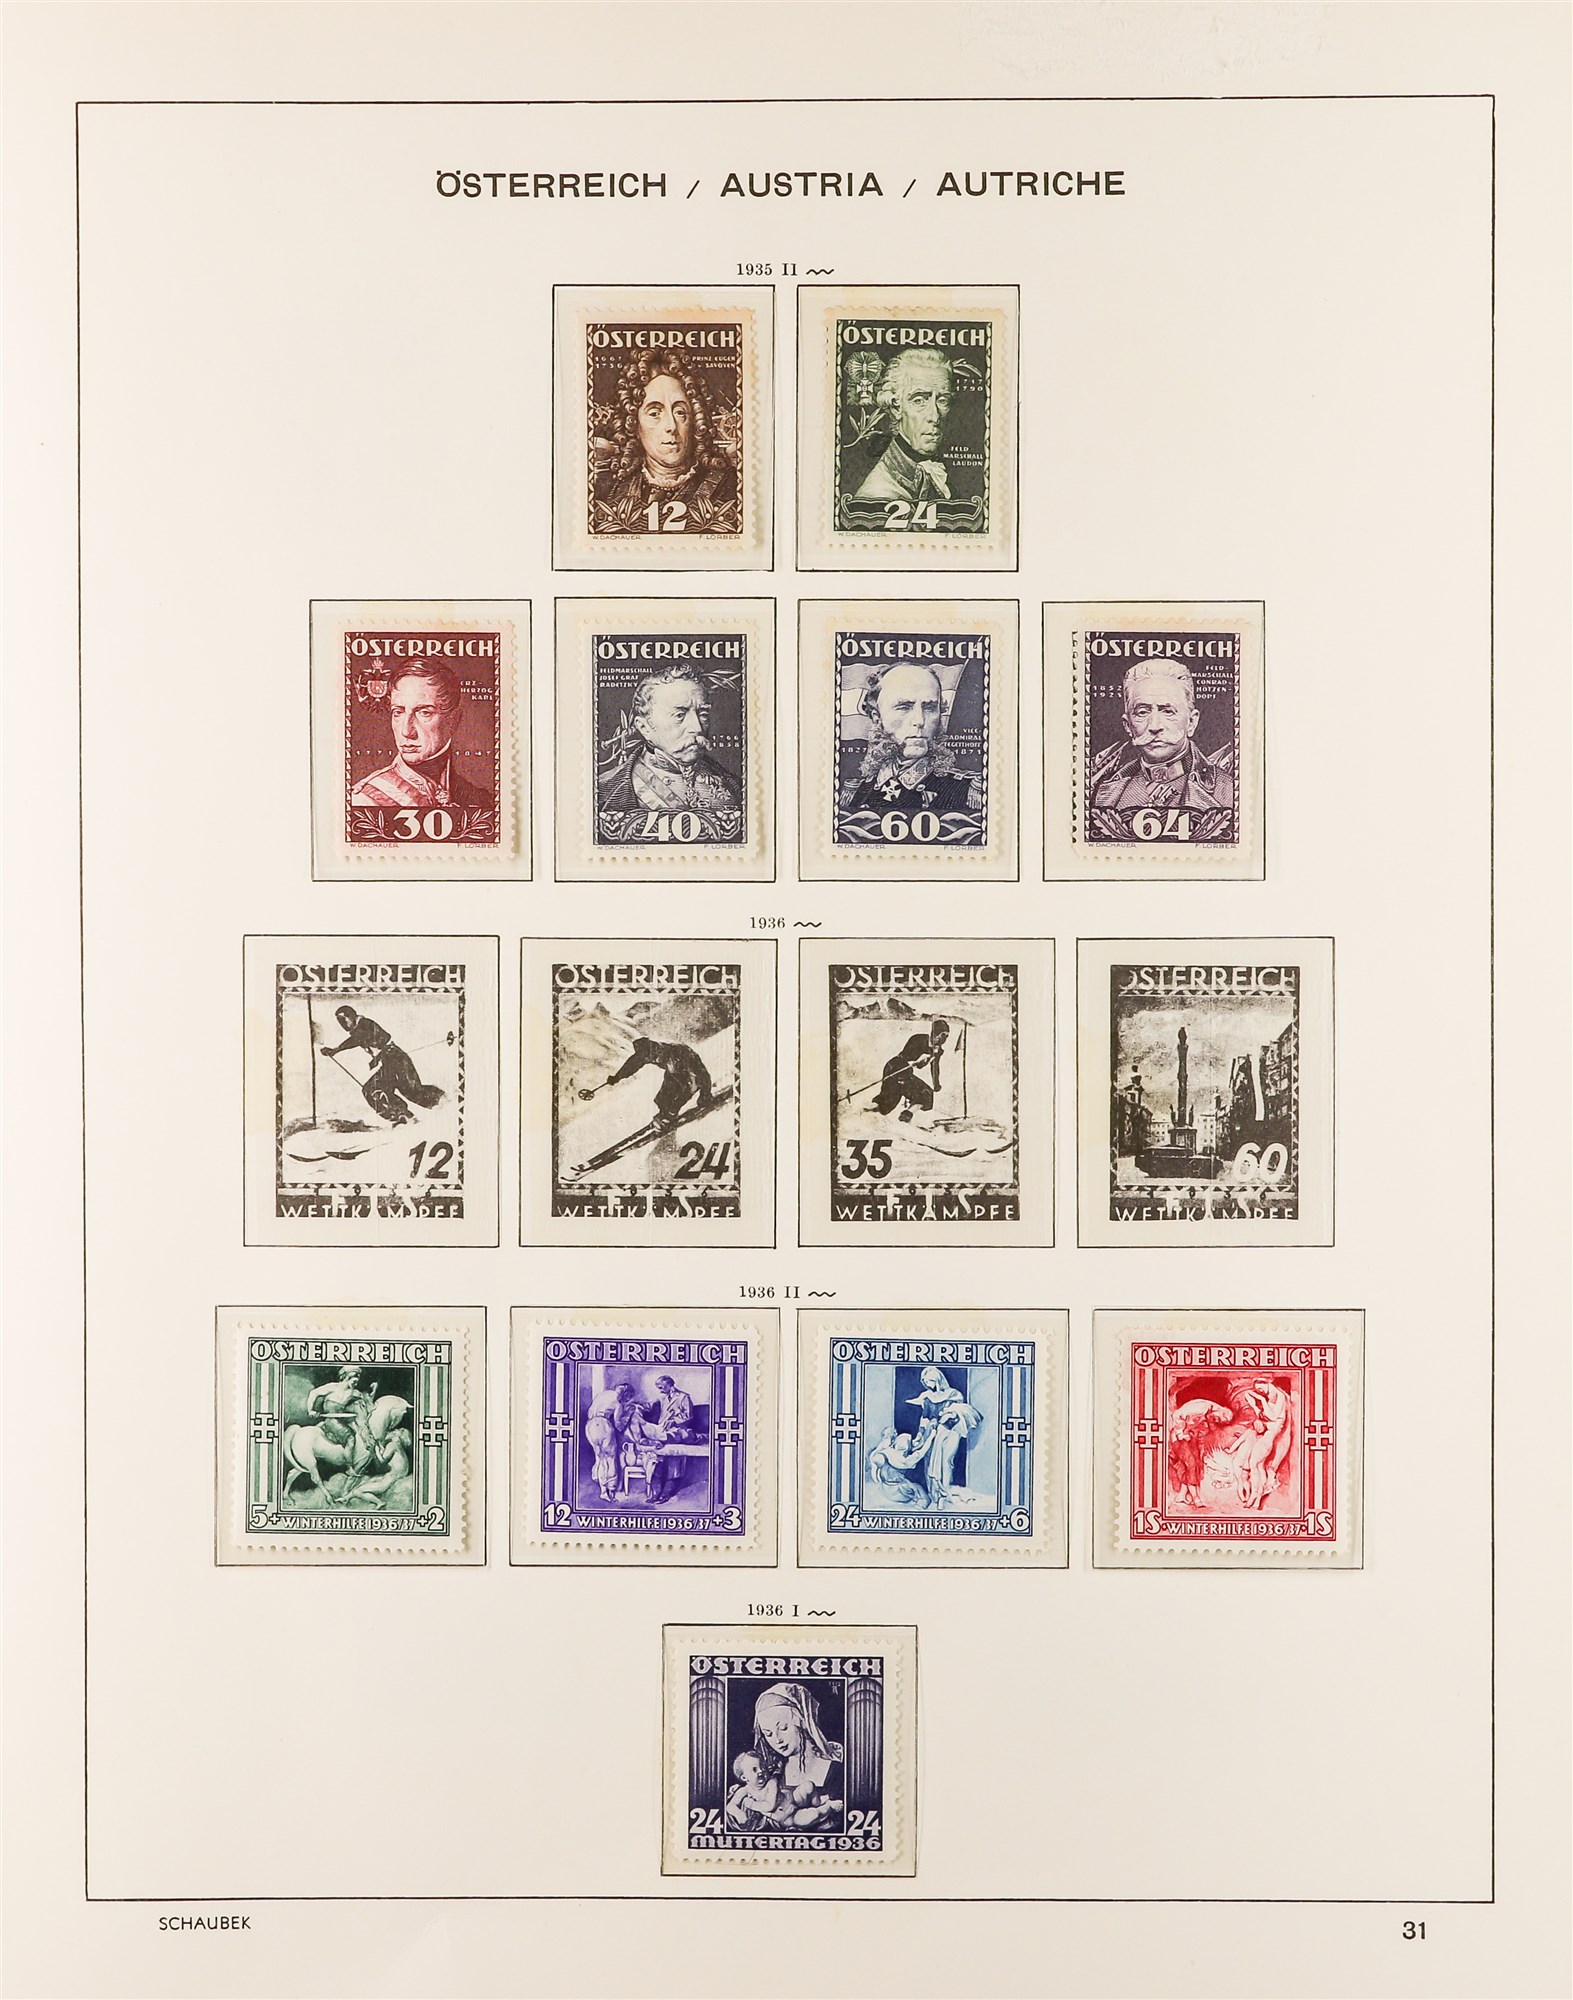 AUSTRIA 1850 - 1937 COLLECTION. of around 1000 mint & used stamps in Schaubek Austria hingeless - Image 23 of 29